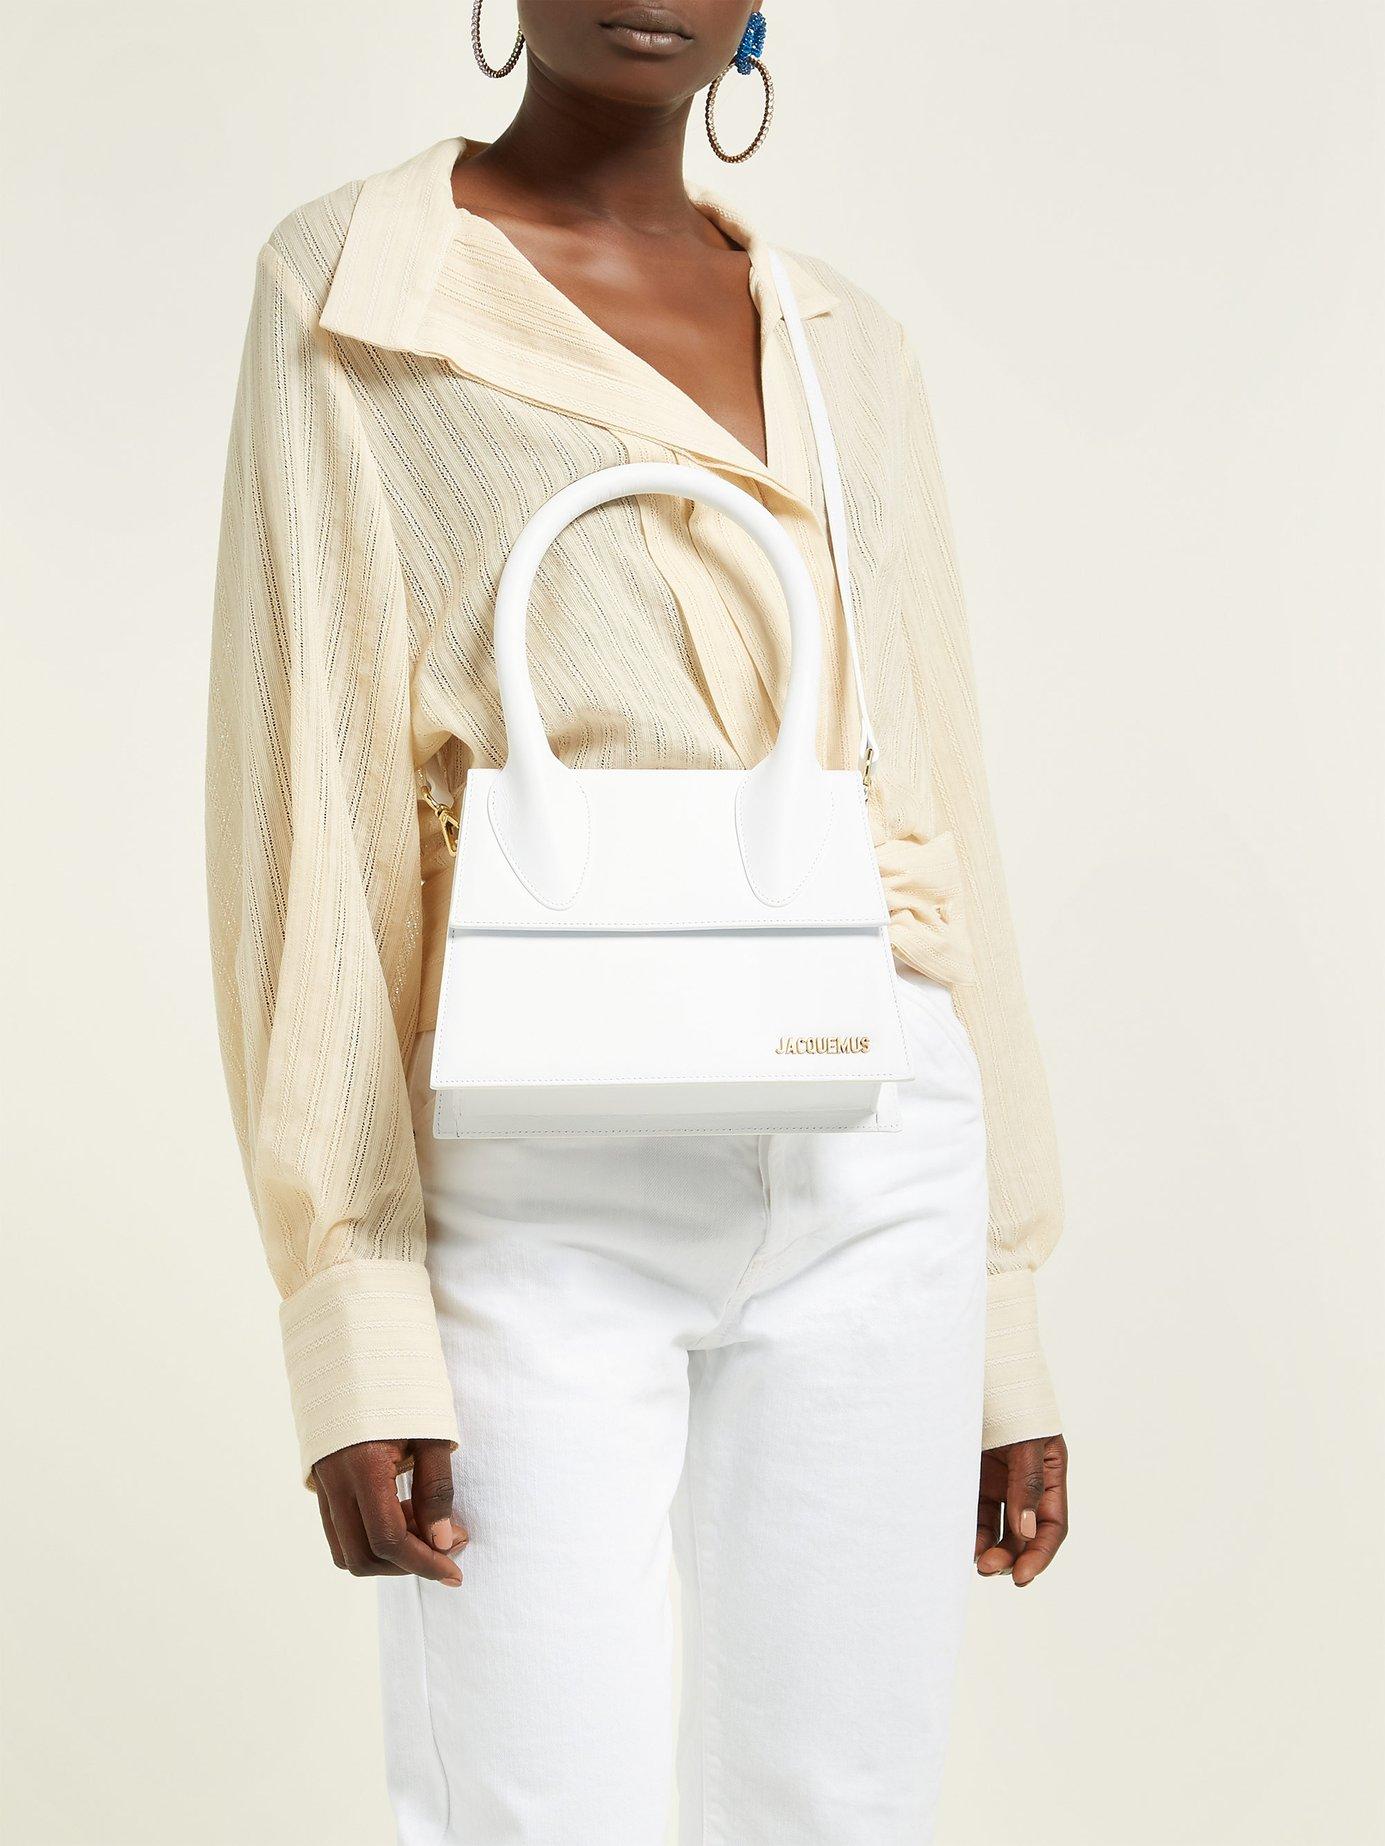 Jacquemus Leather Le Grand Chiquito Bag in White - Lyst